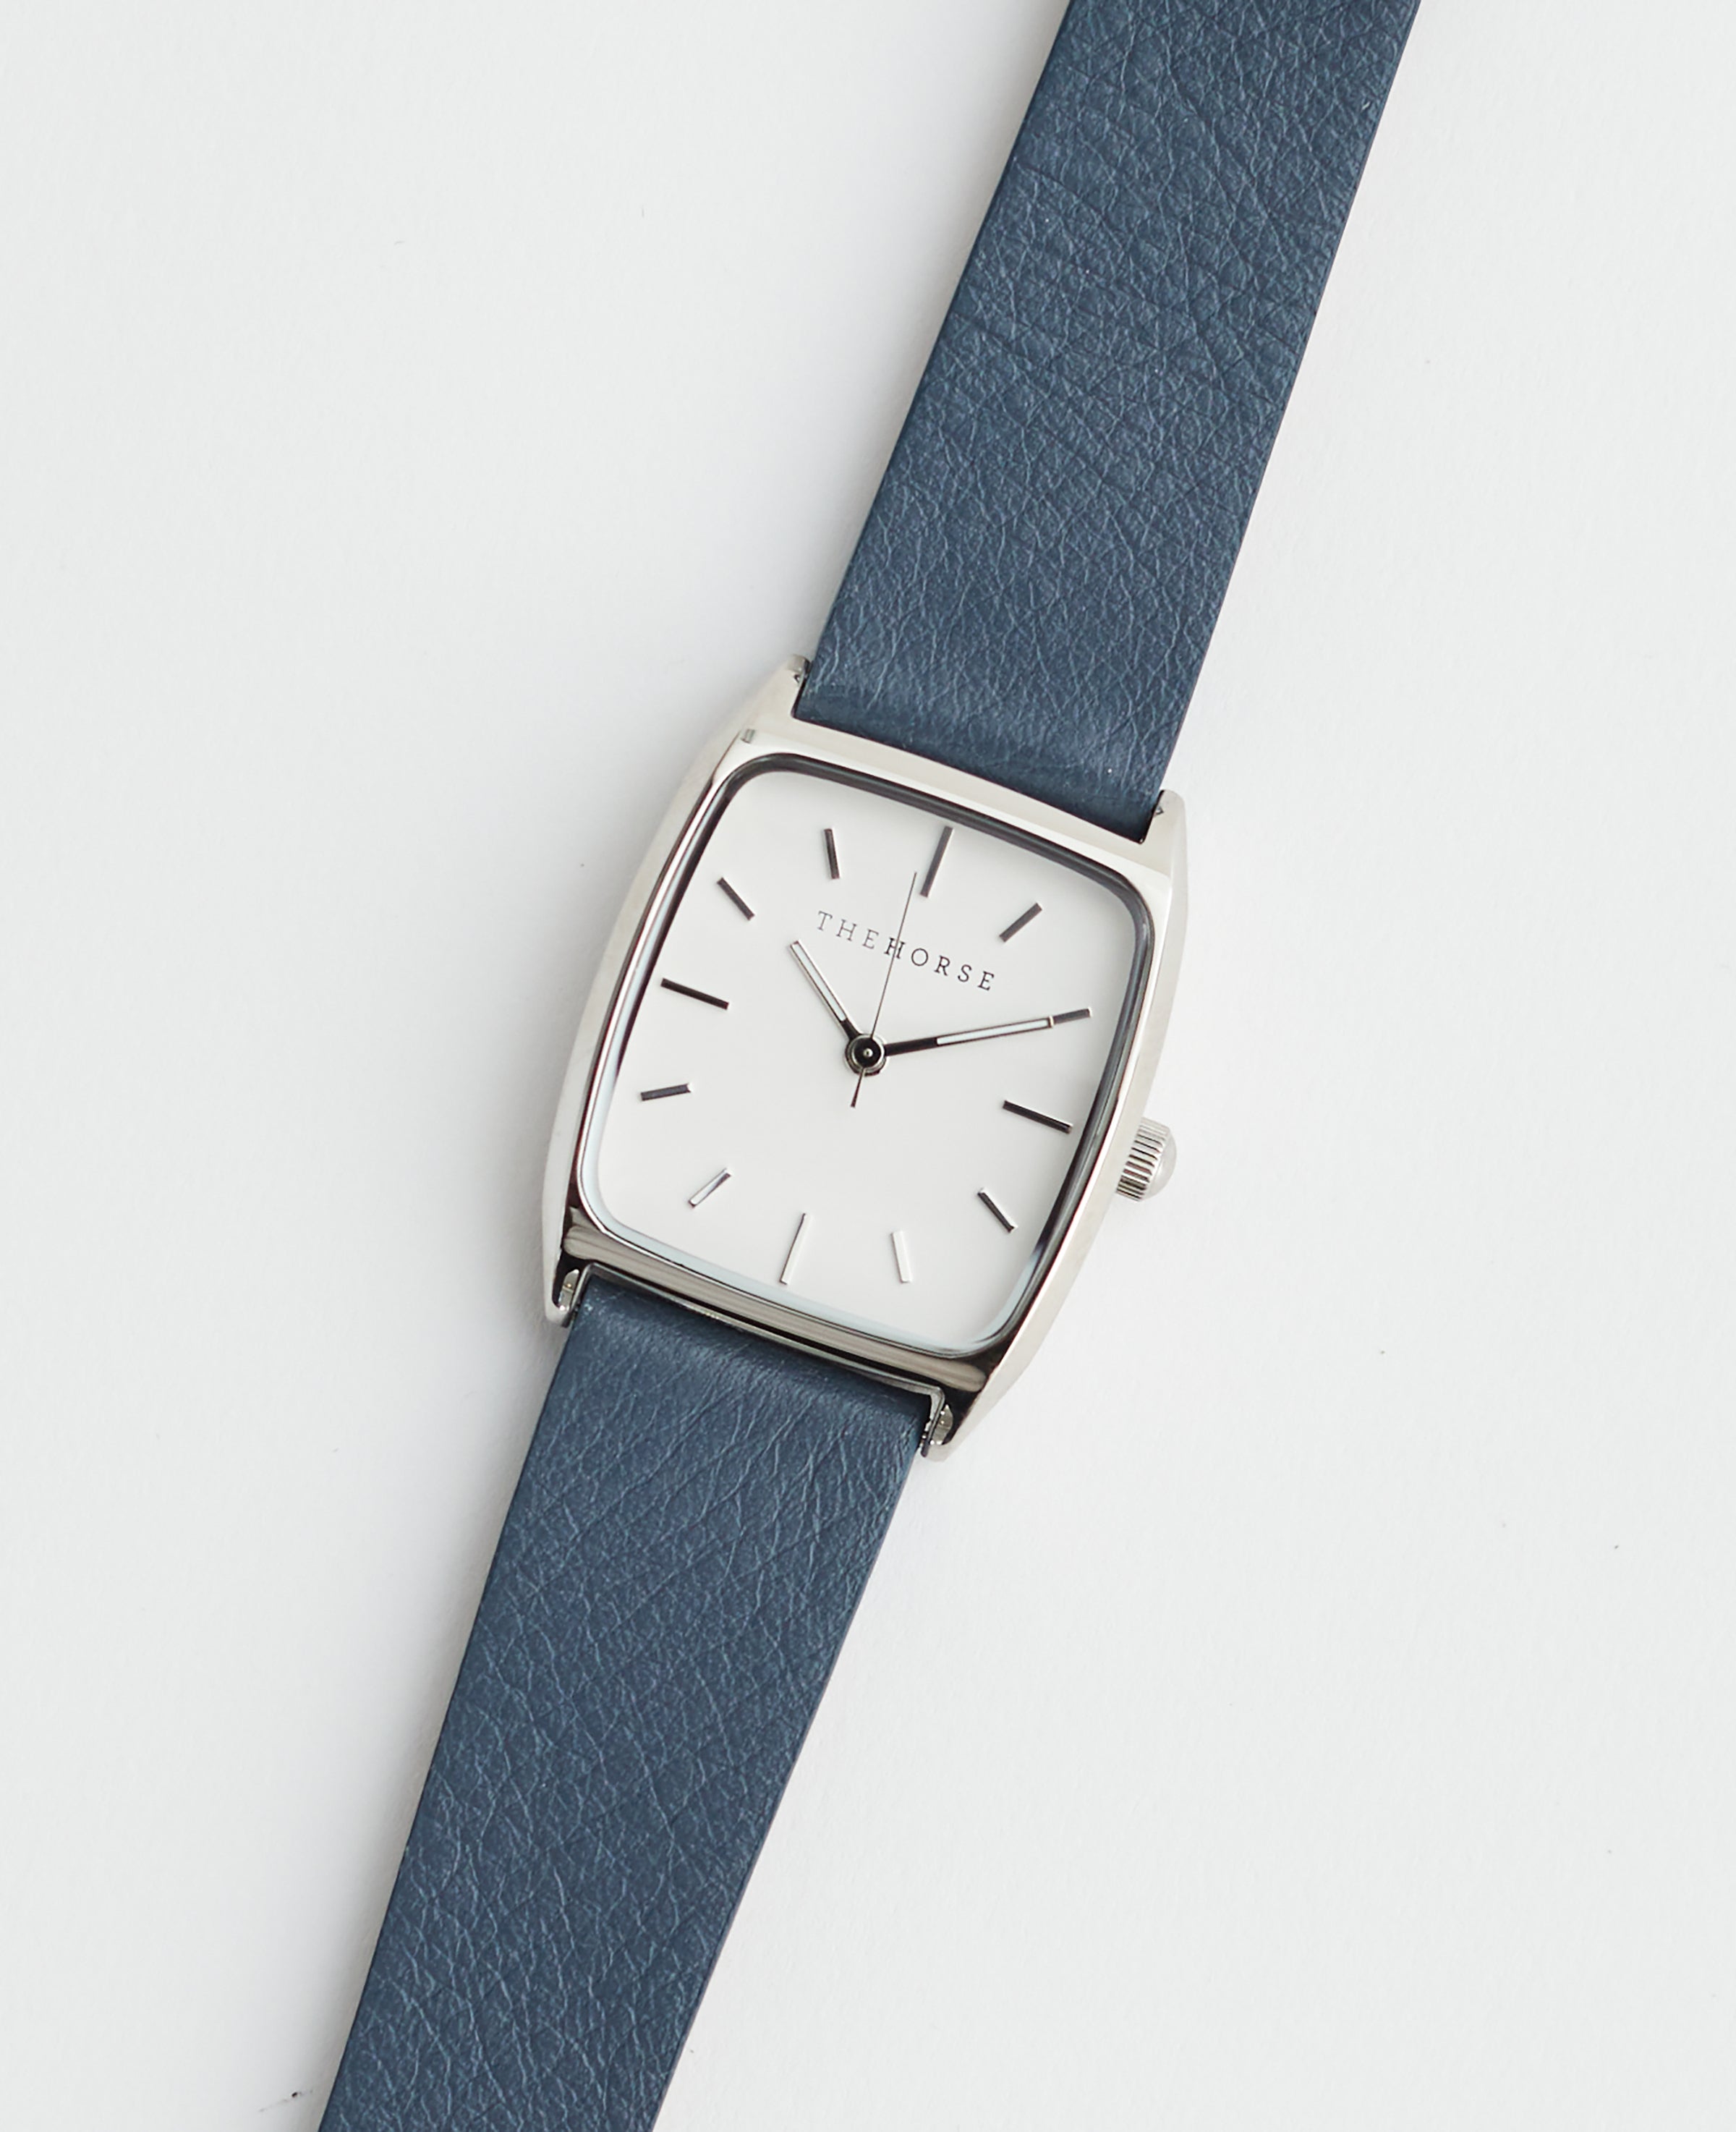 The Dress Watch: Polished Silver / White Dial / Stonewash Leather